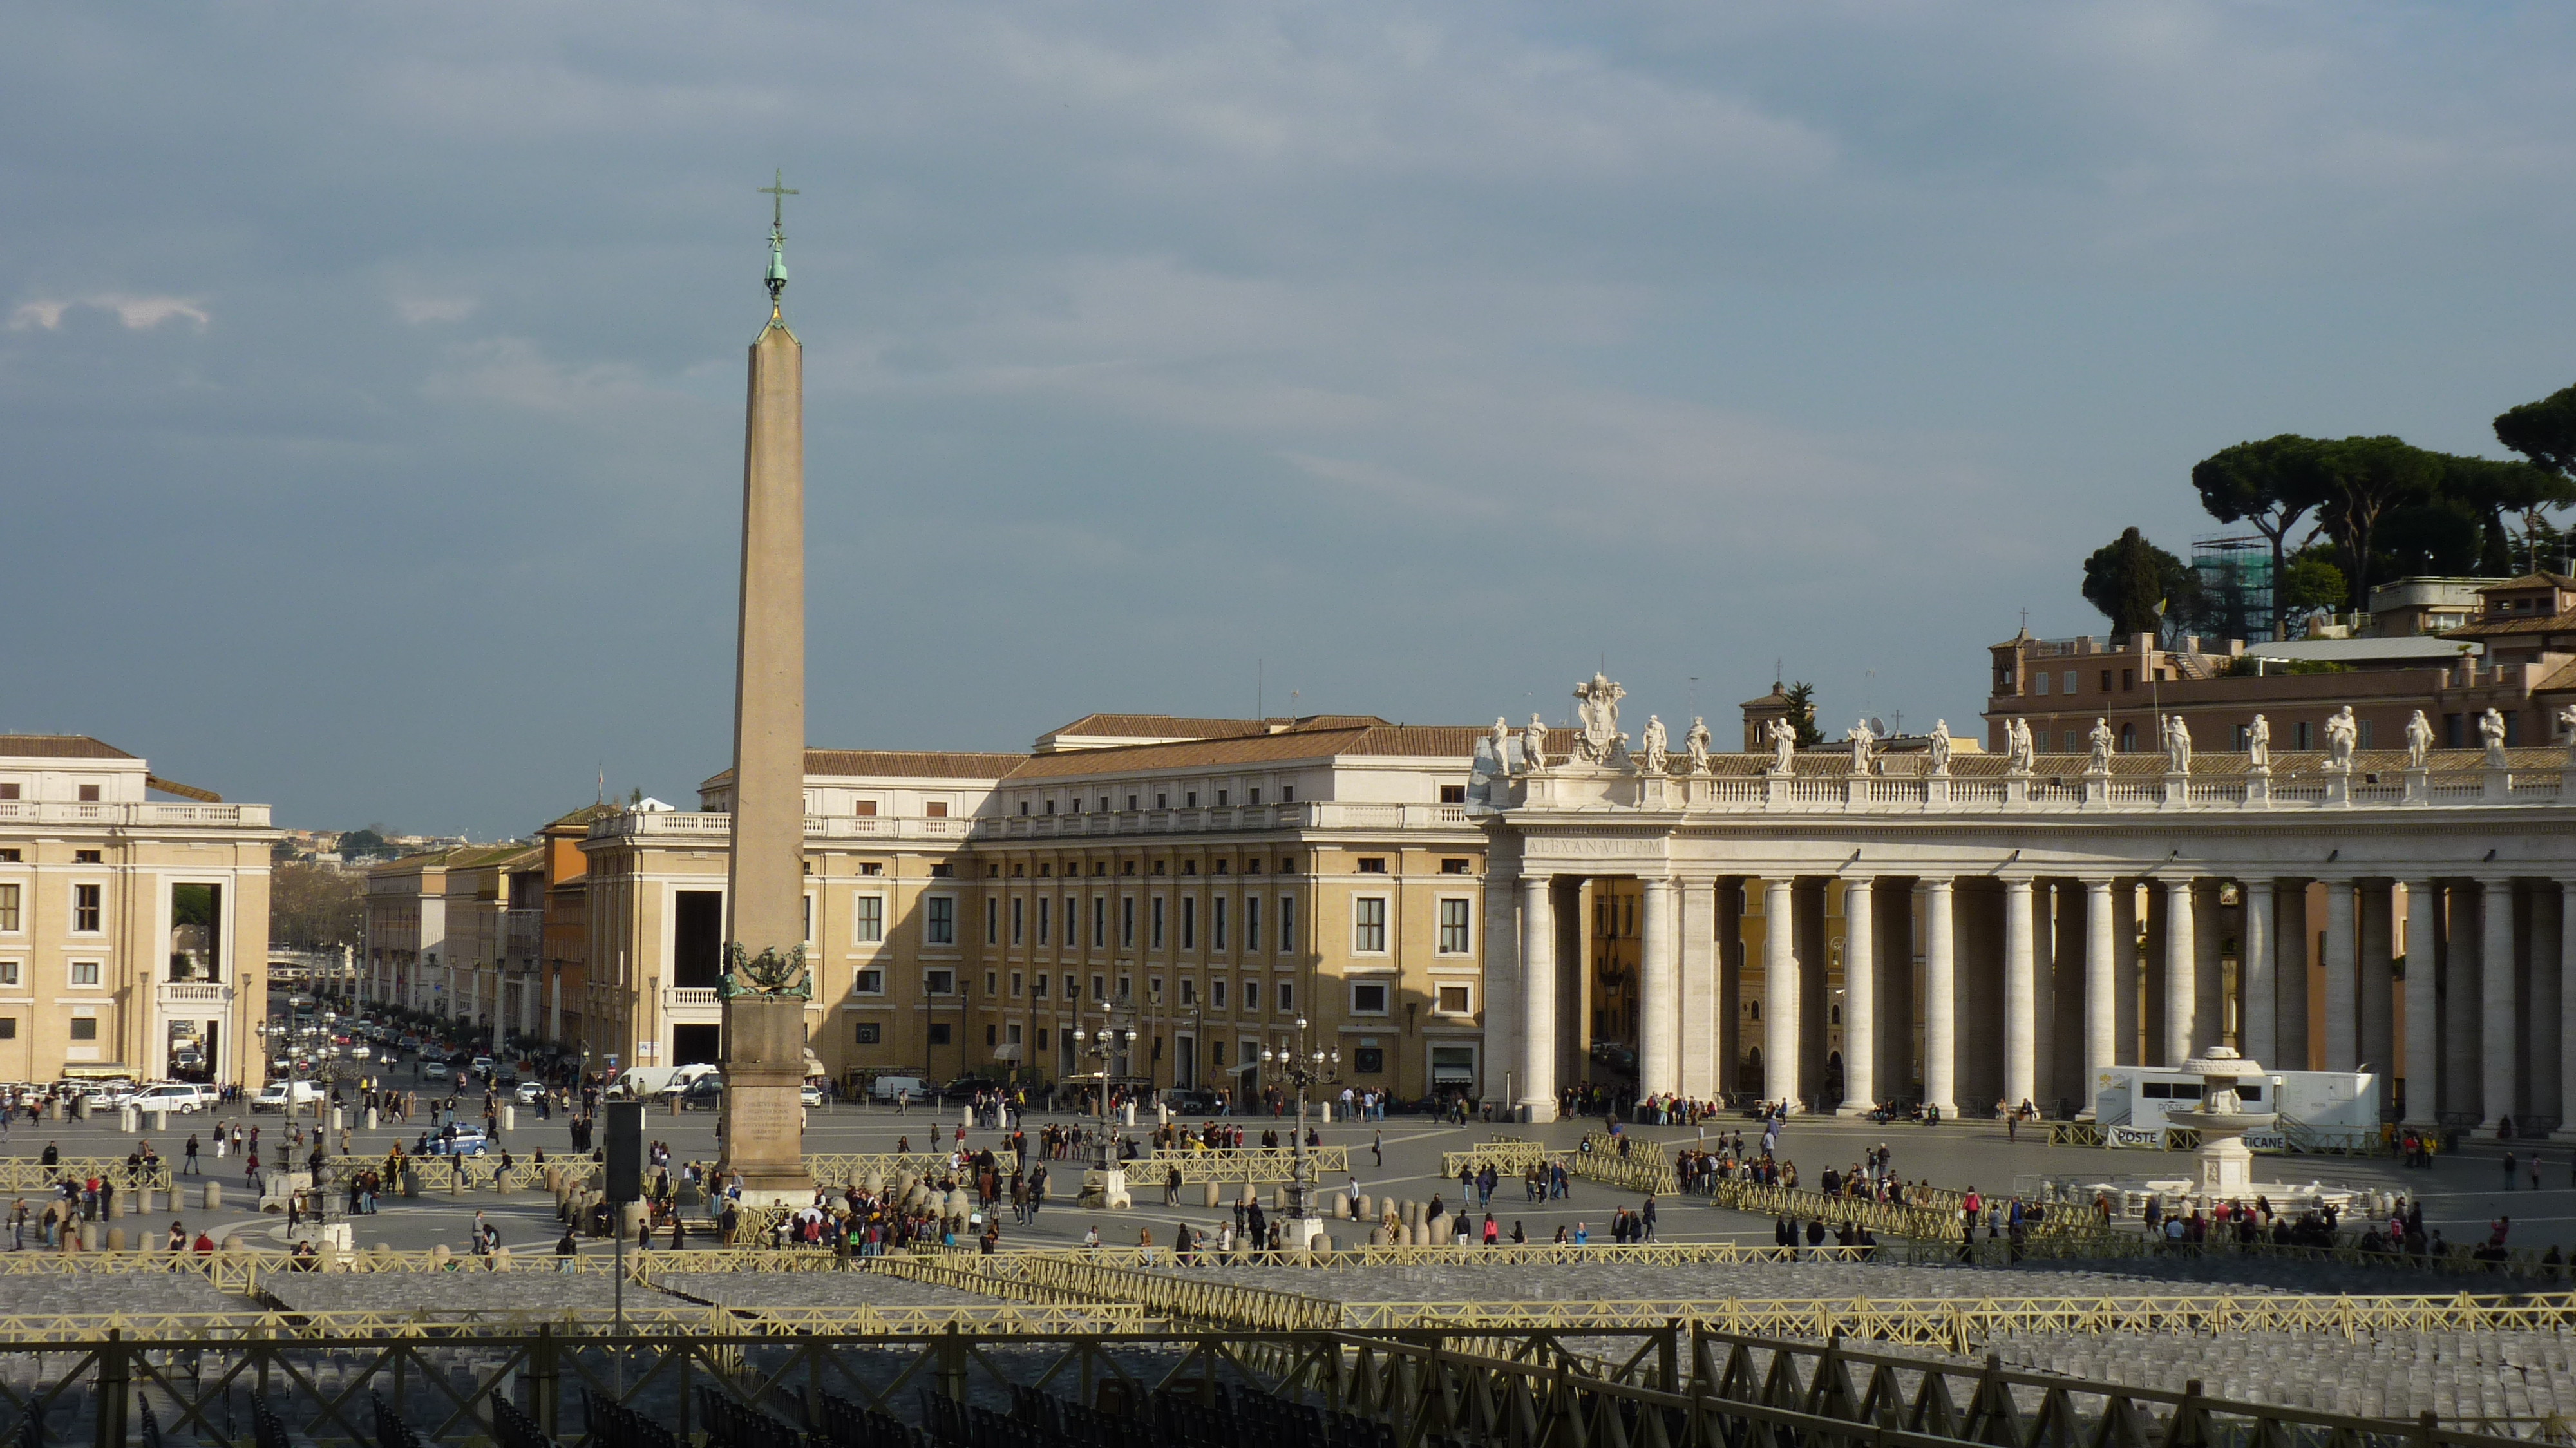 Image of Obelisk and Piazza.